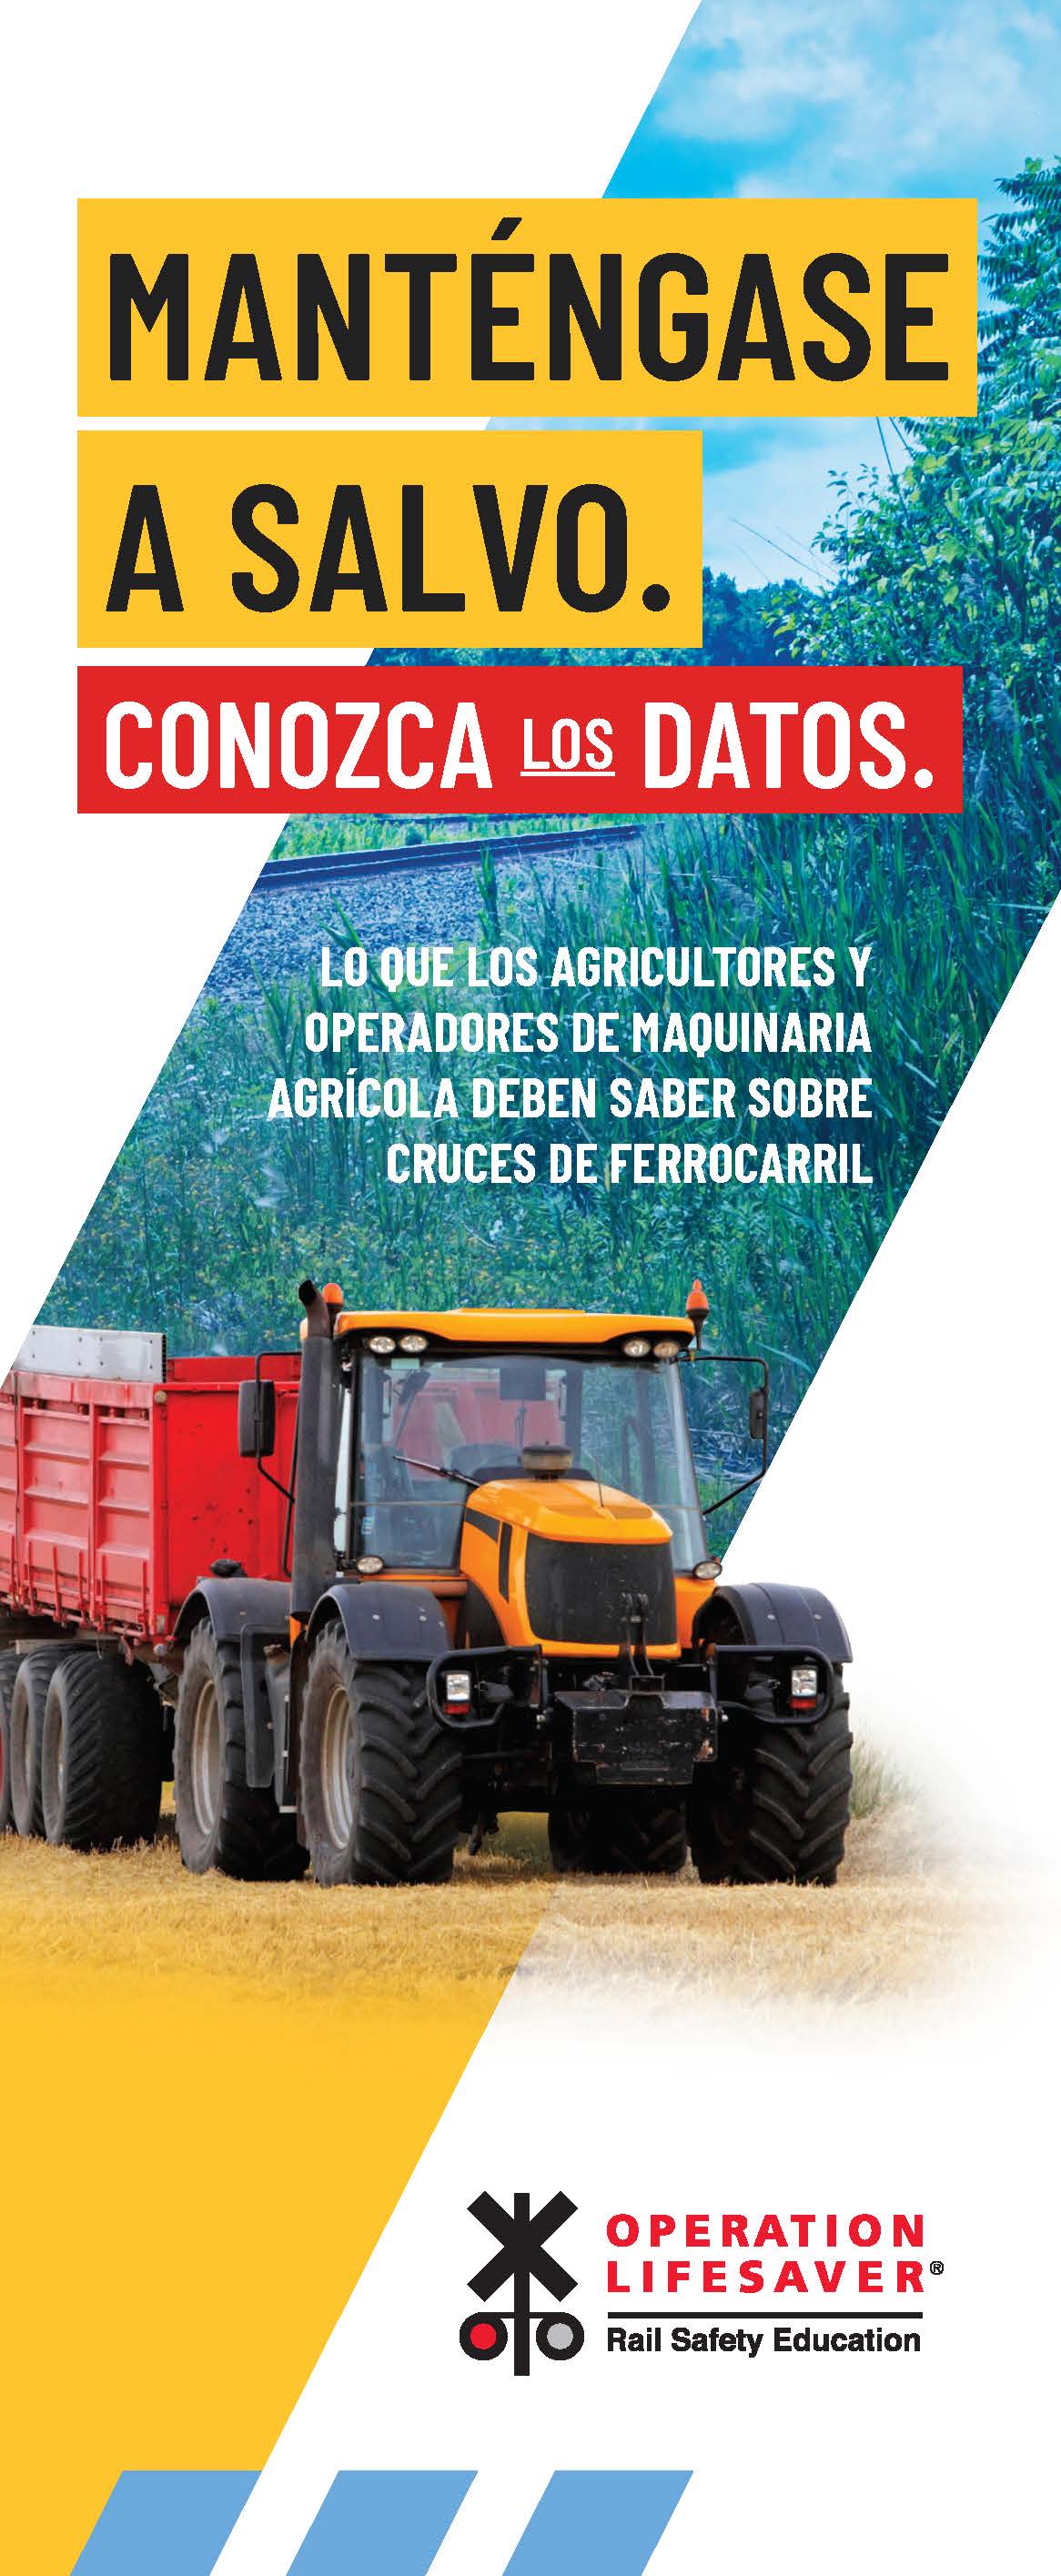 Farmers & Farm Machine Op: Know the Facts. Spanish